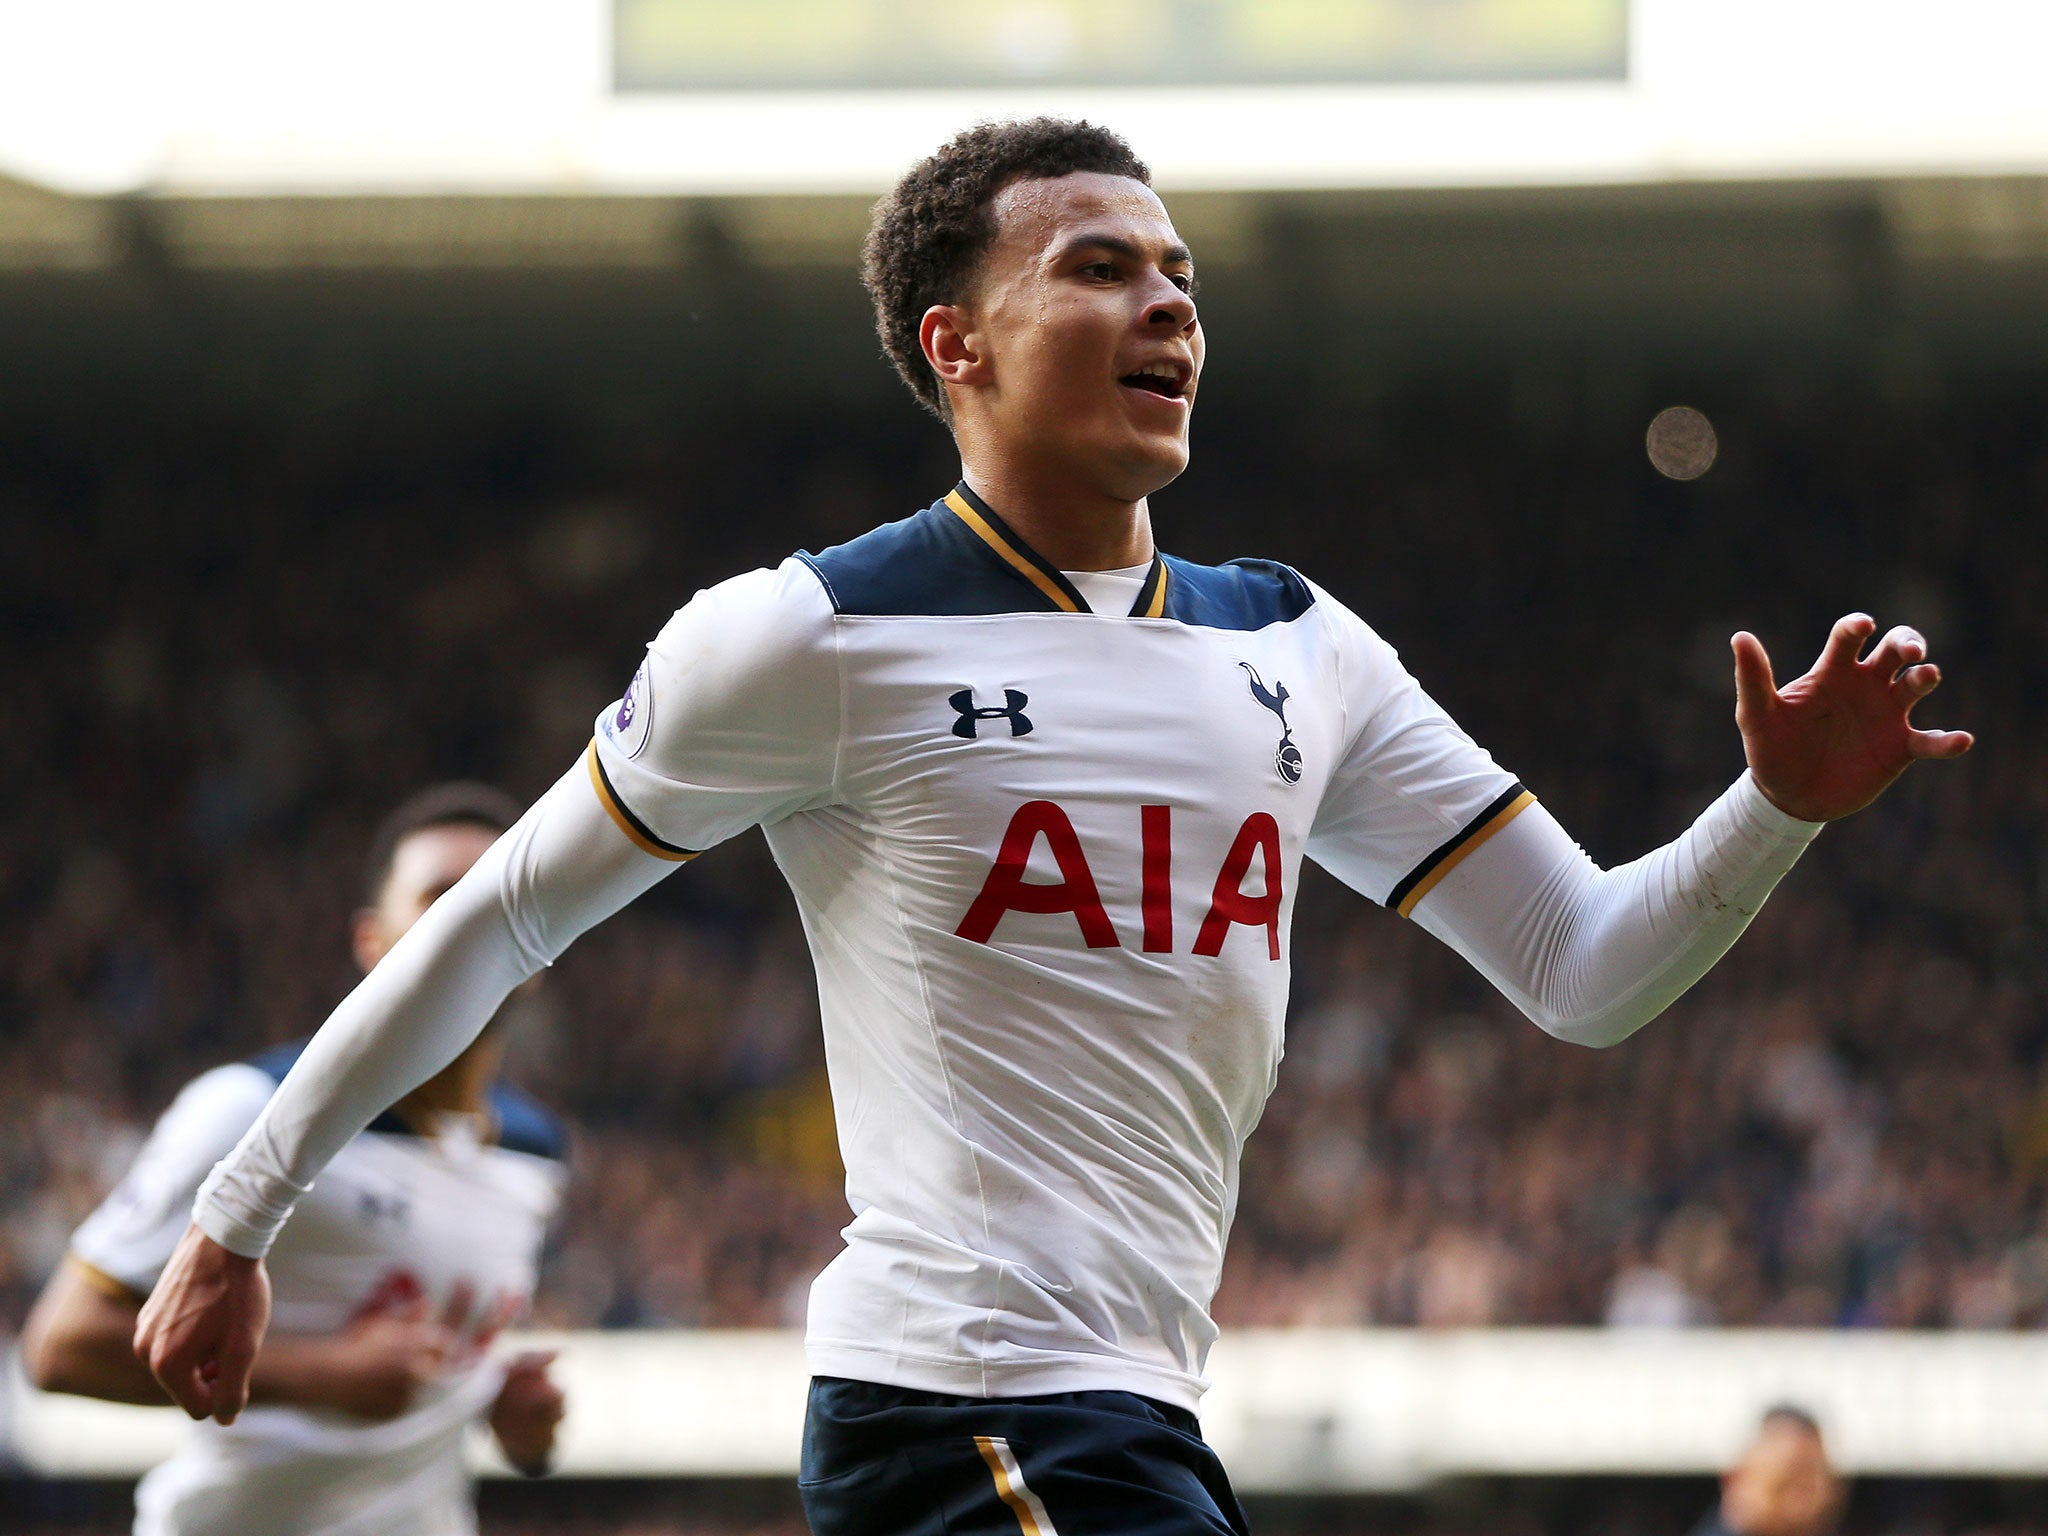 Dele Alli scored from the spot to seal the win for Tottenham